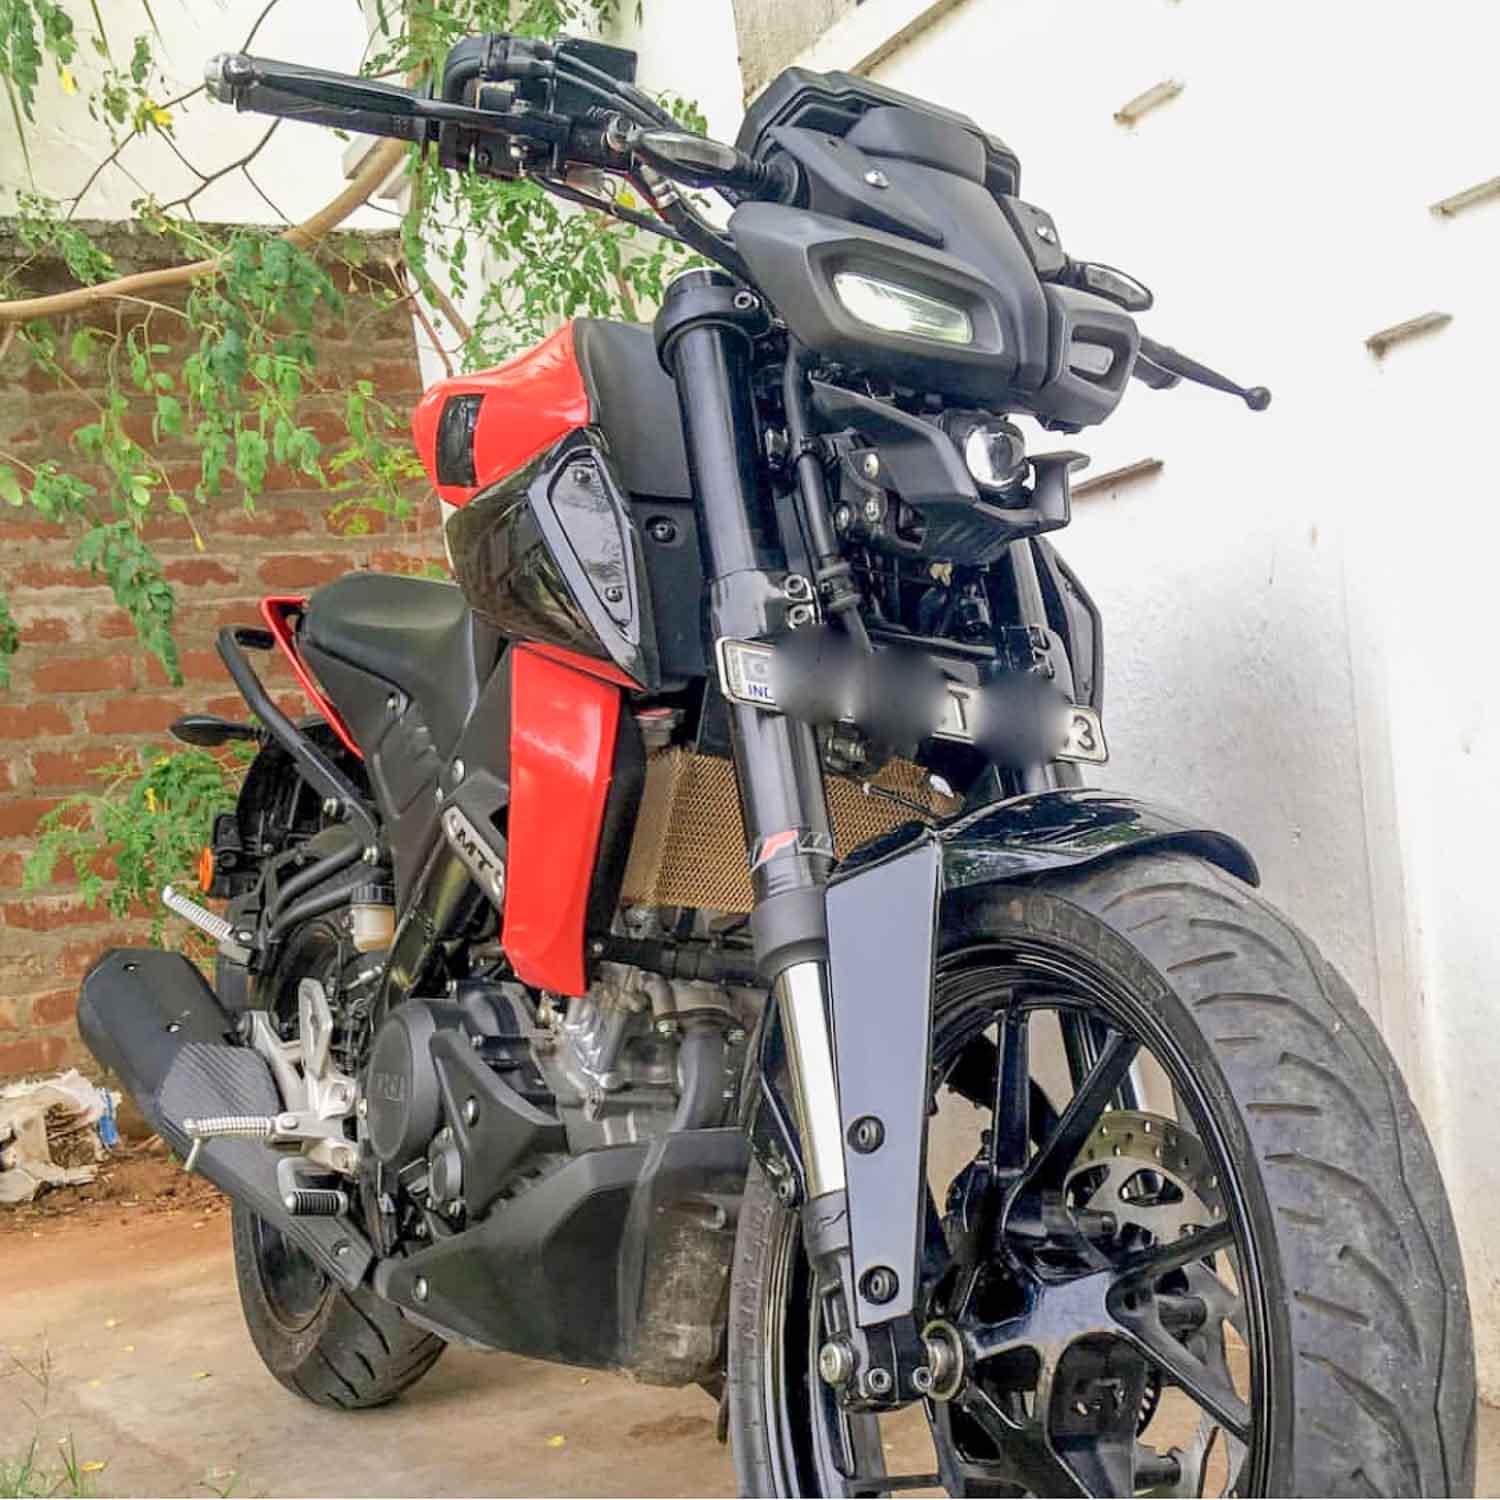 Here Is India’s First MT15 Customised With USD Forks